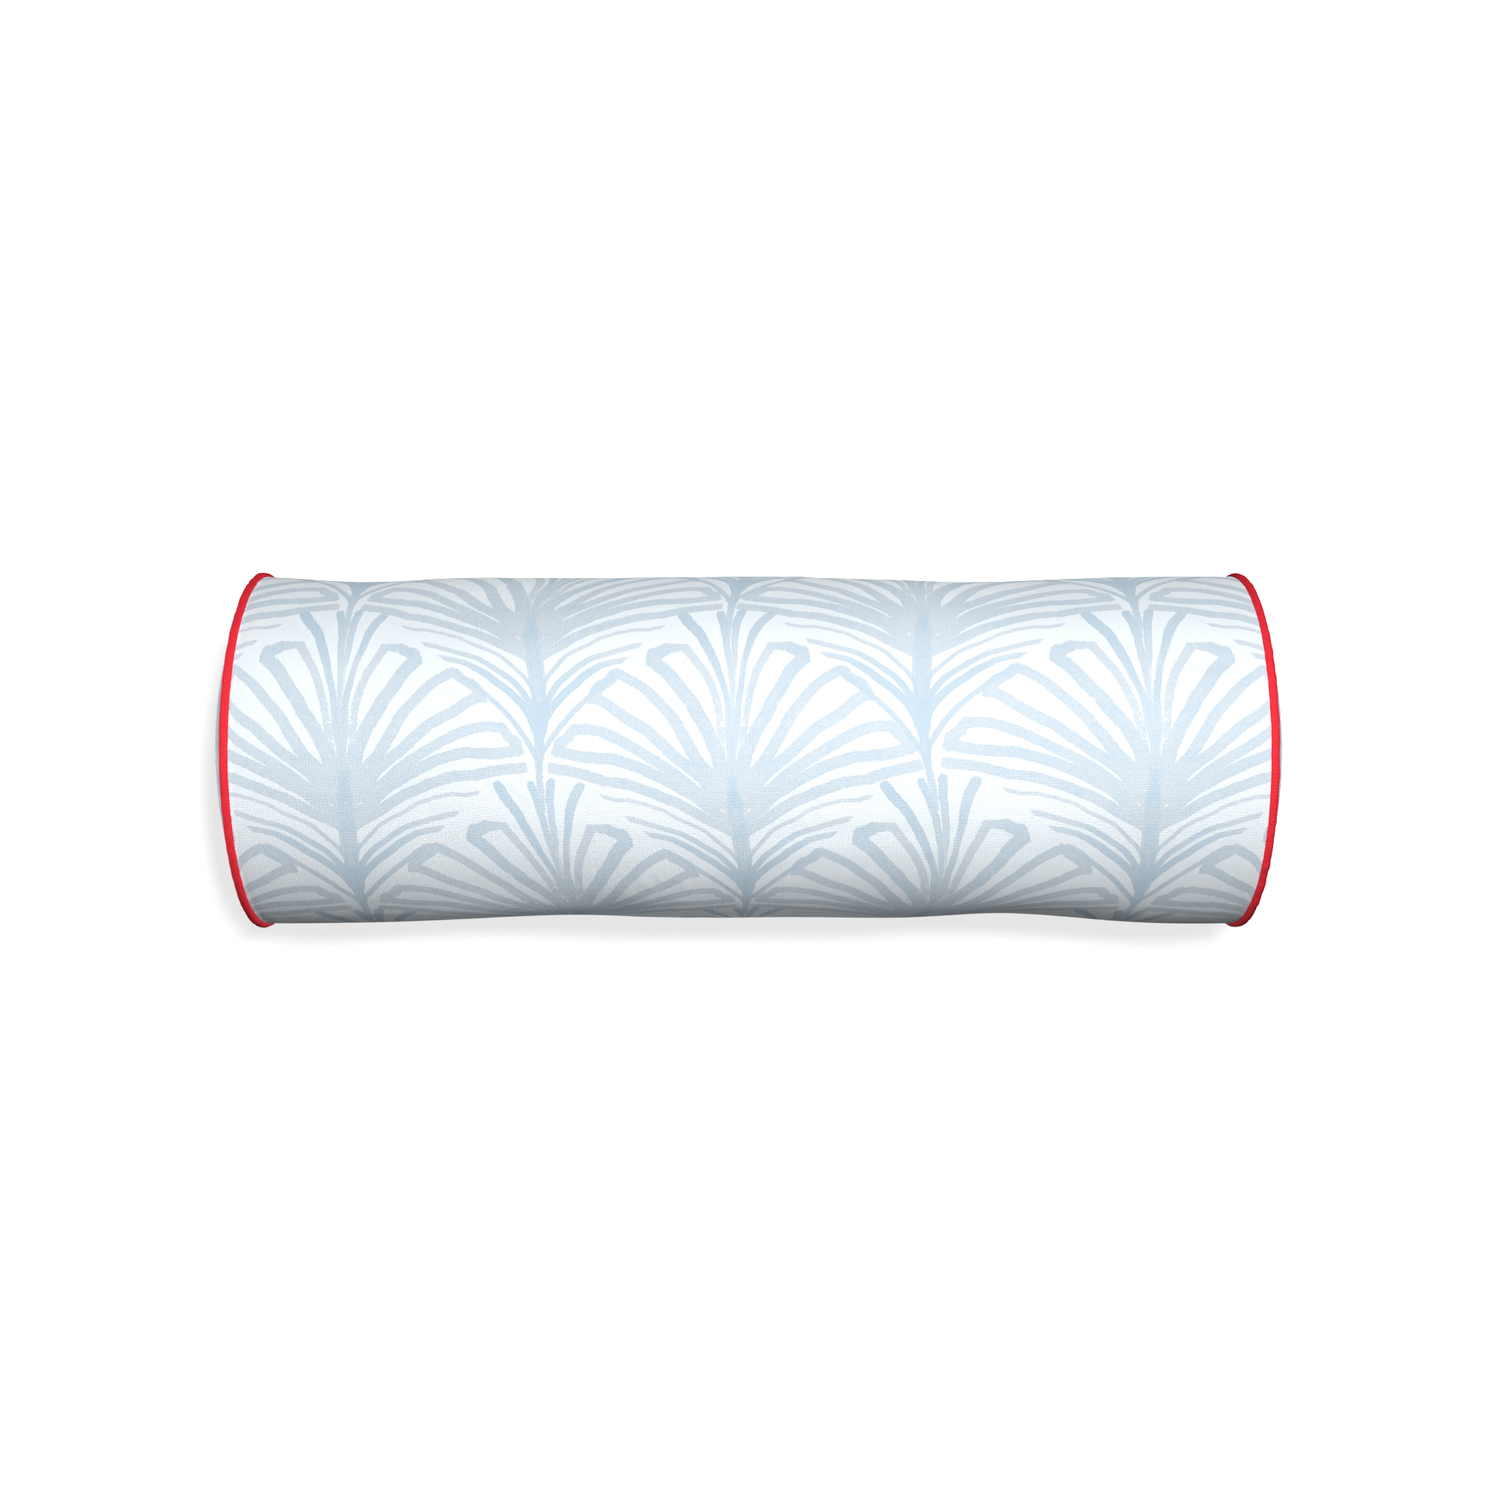 Bolster suzy sky custom pillow with cherry piping on white background